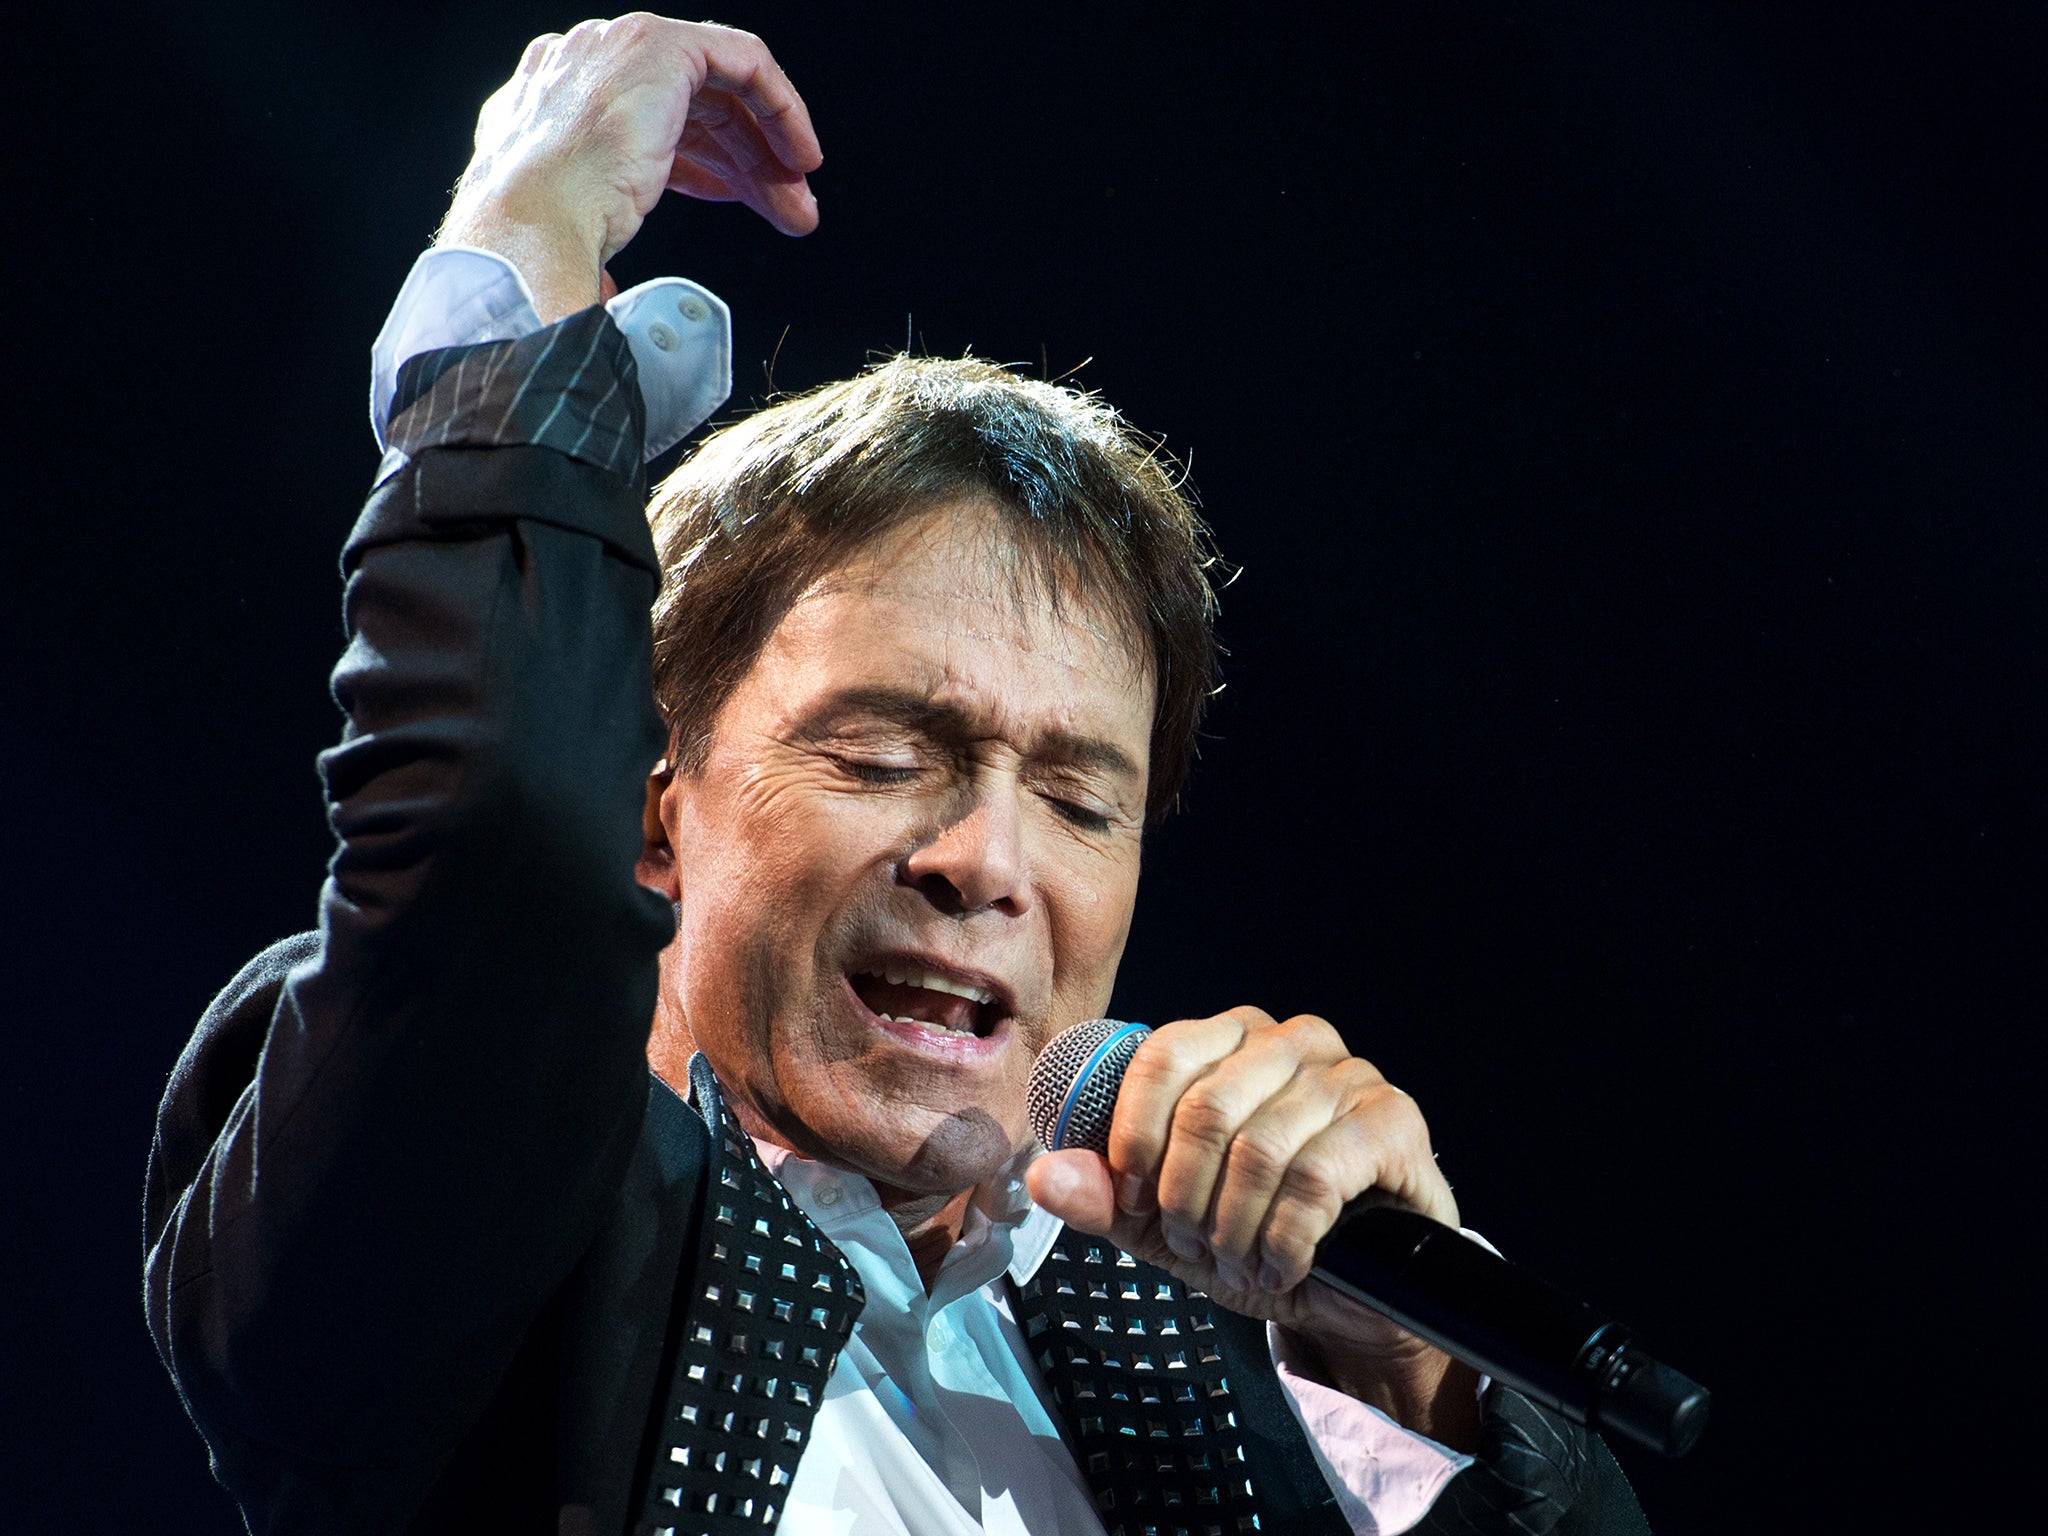 Cliff Richard performs at the Ziggo Dome in Amsterdam on 17 May 2014